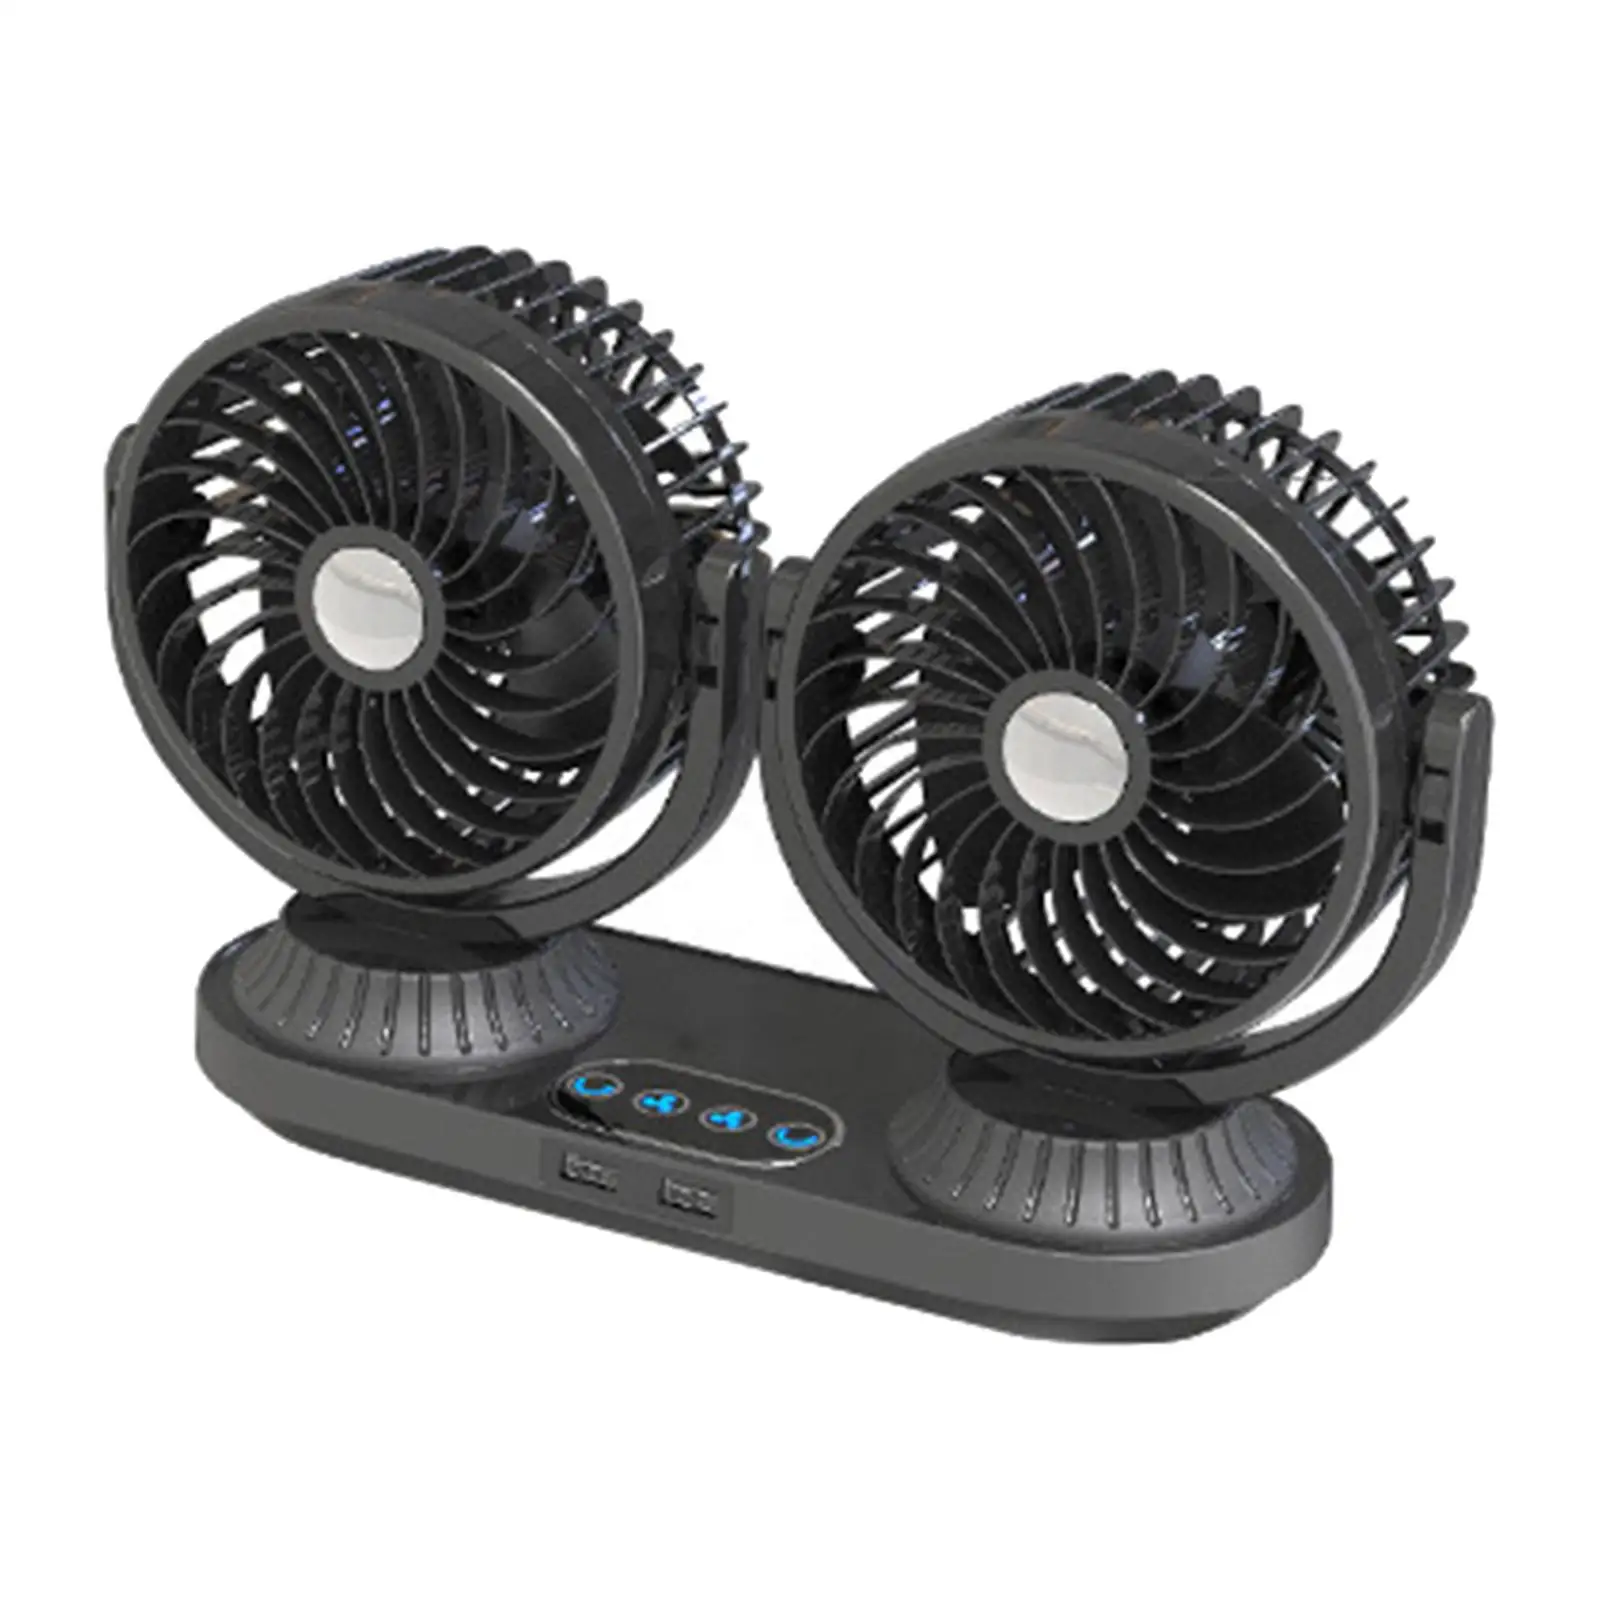 Dual Heads Car Fan 12V 24V Universal Electric 360 Left and Right Touch Adjustment Air Circulation Fan Dashboard Air Cooler